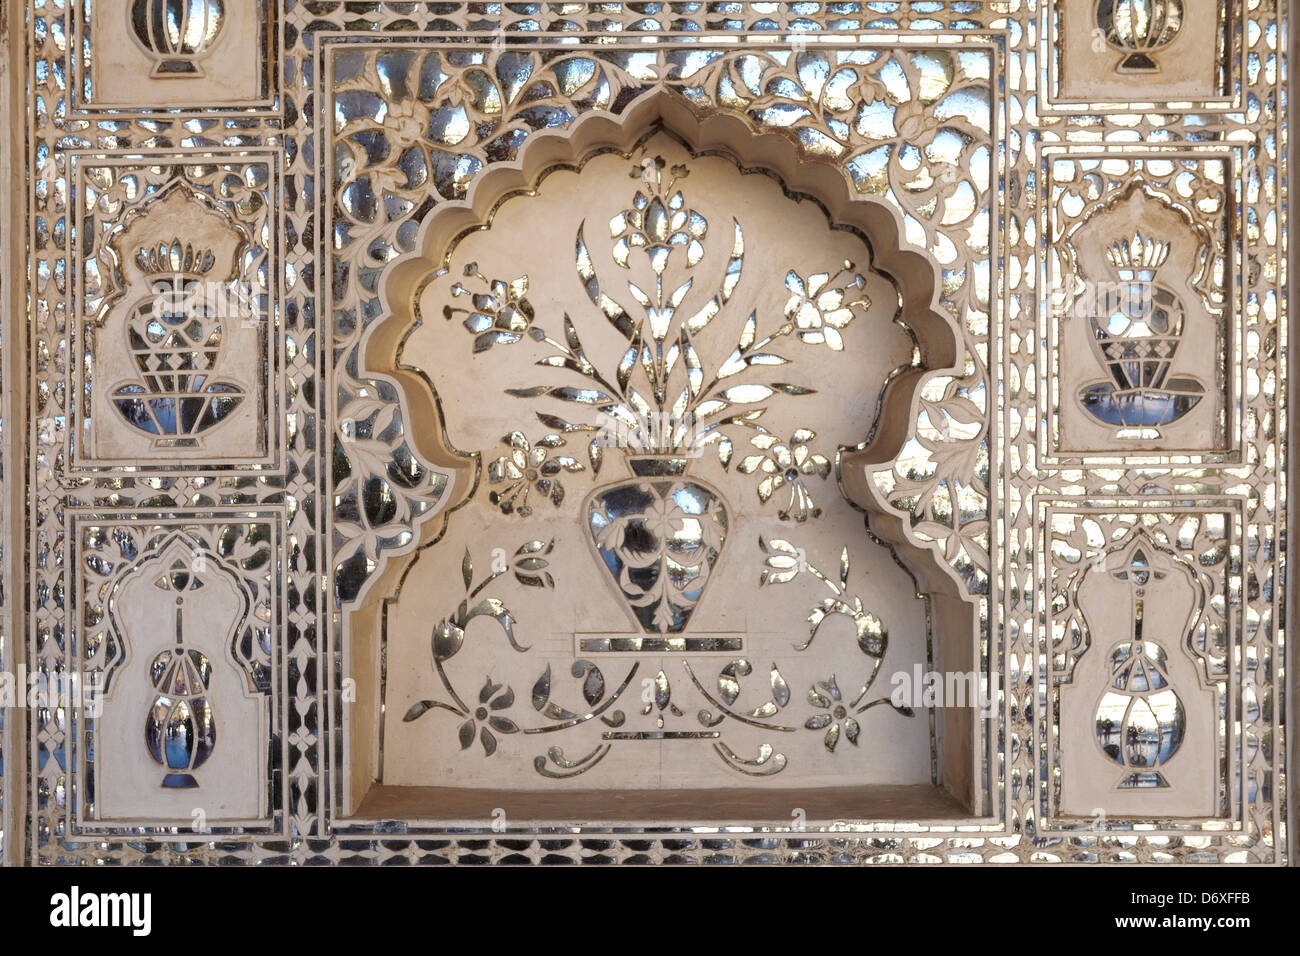 An interior view of a art detail wall covered in thousands of tiny mirrors, Amber Fort 11km near of Jaipur, Rajasthan, India Stock Photo